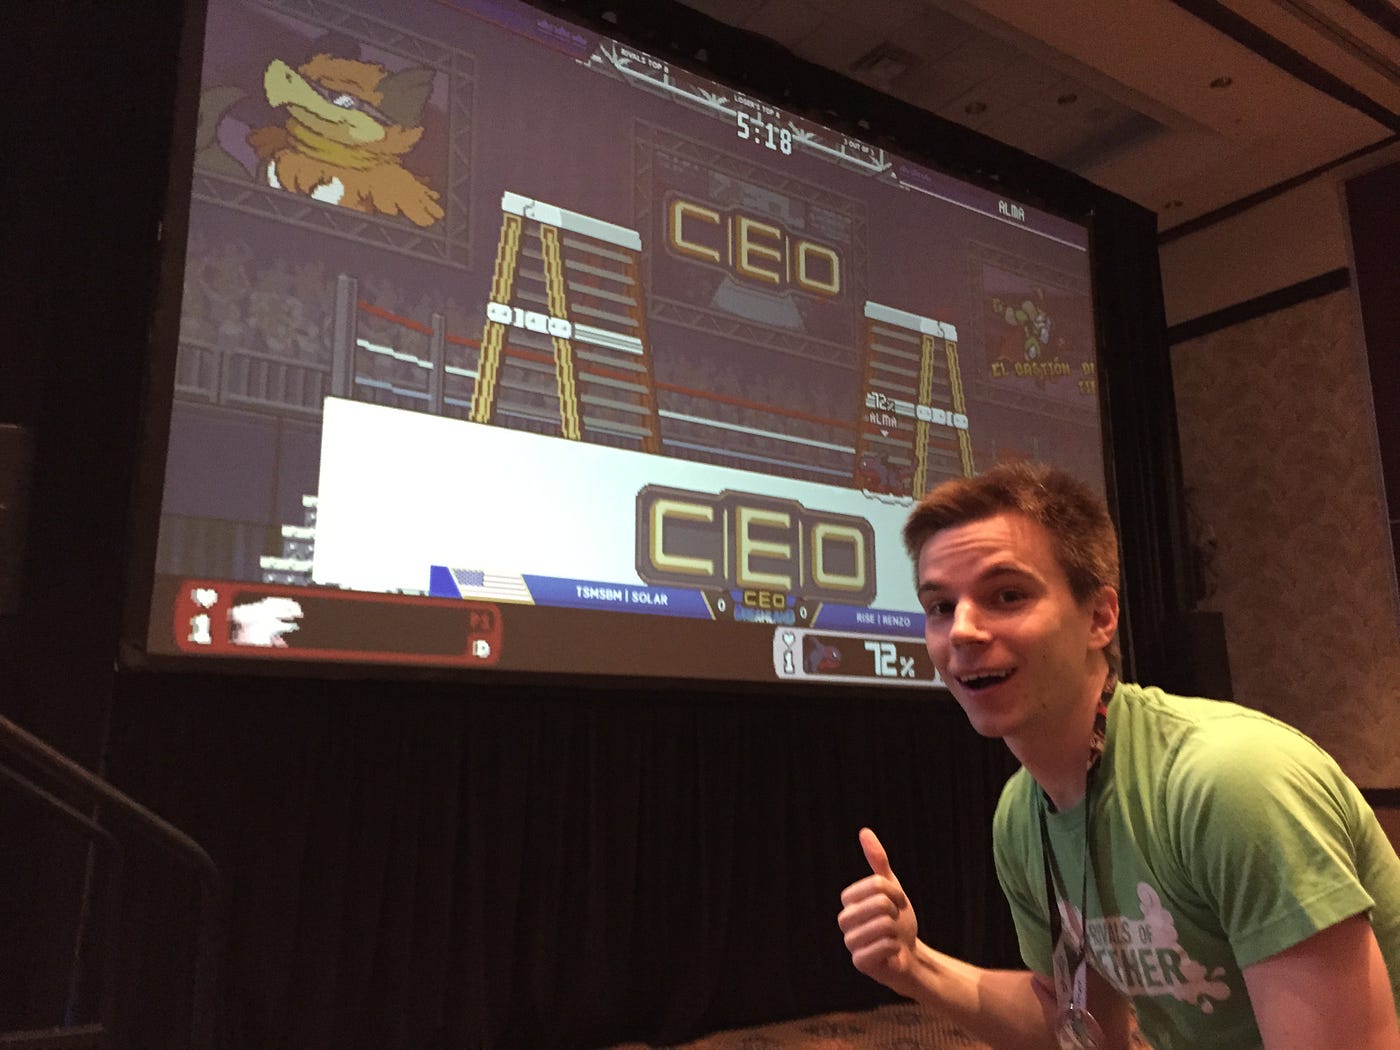 Dan Fornace's 10 Tips for Making a Fighting Game, by Dan Fornace